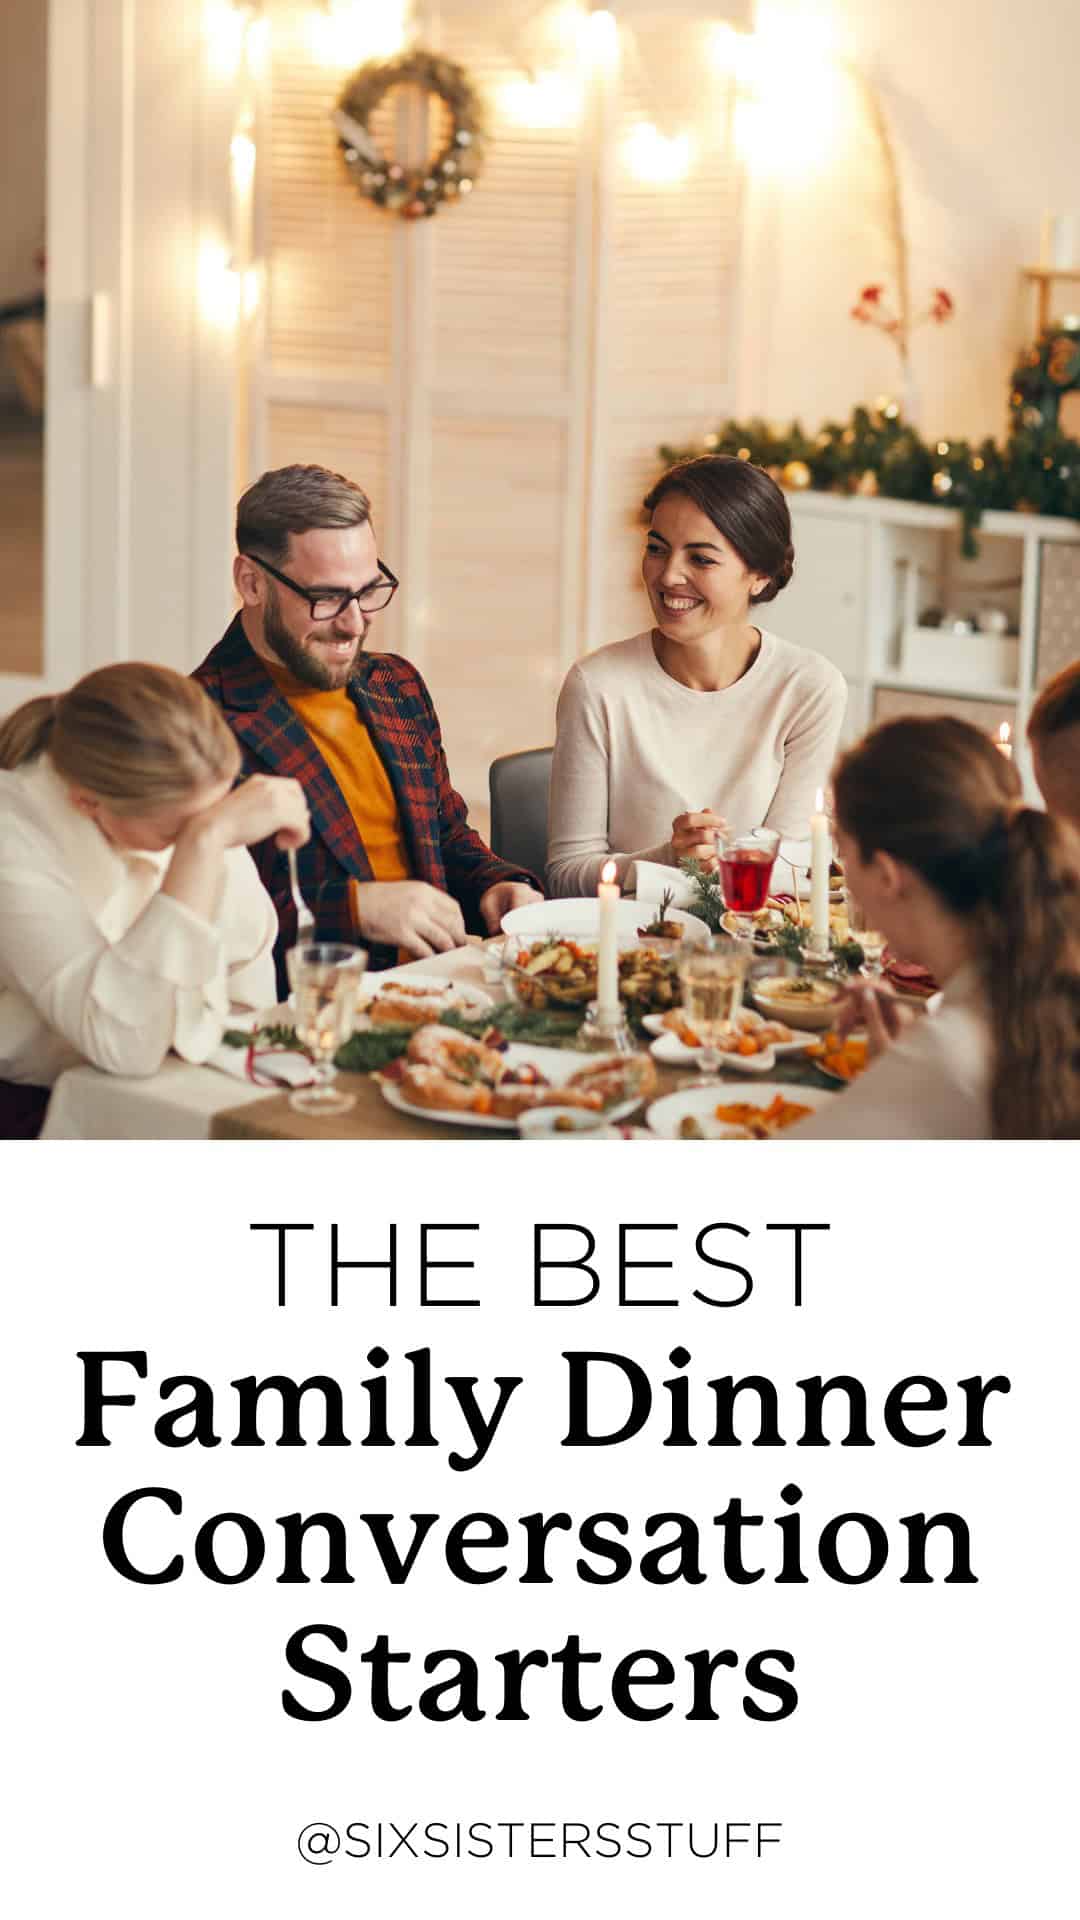 50 Family Dinner Conversation Starters (Questions to ask your kids)